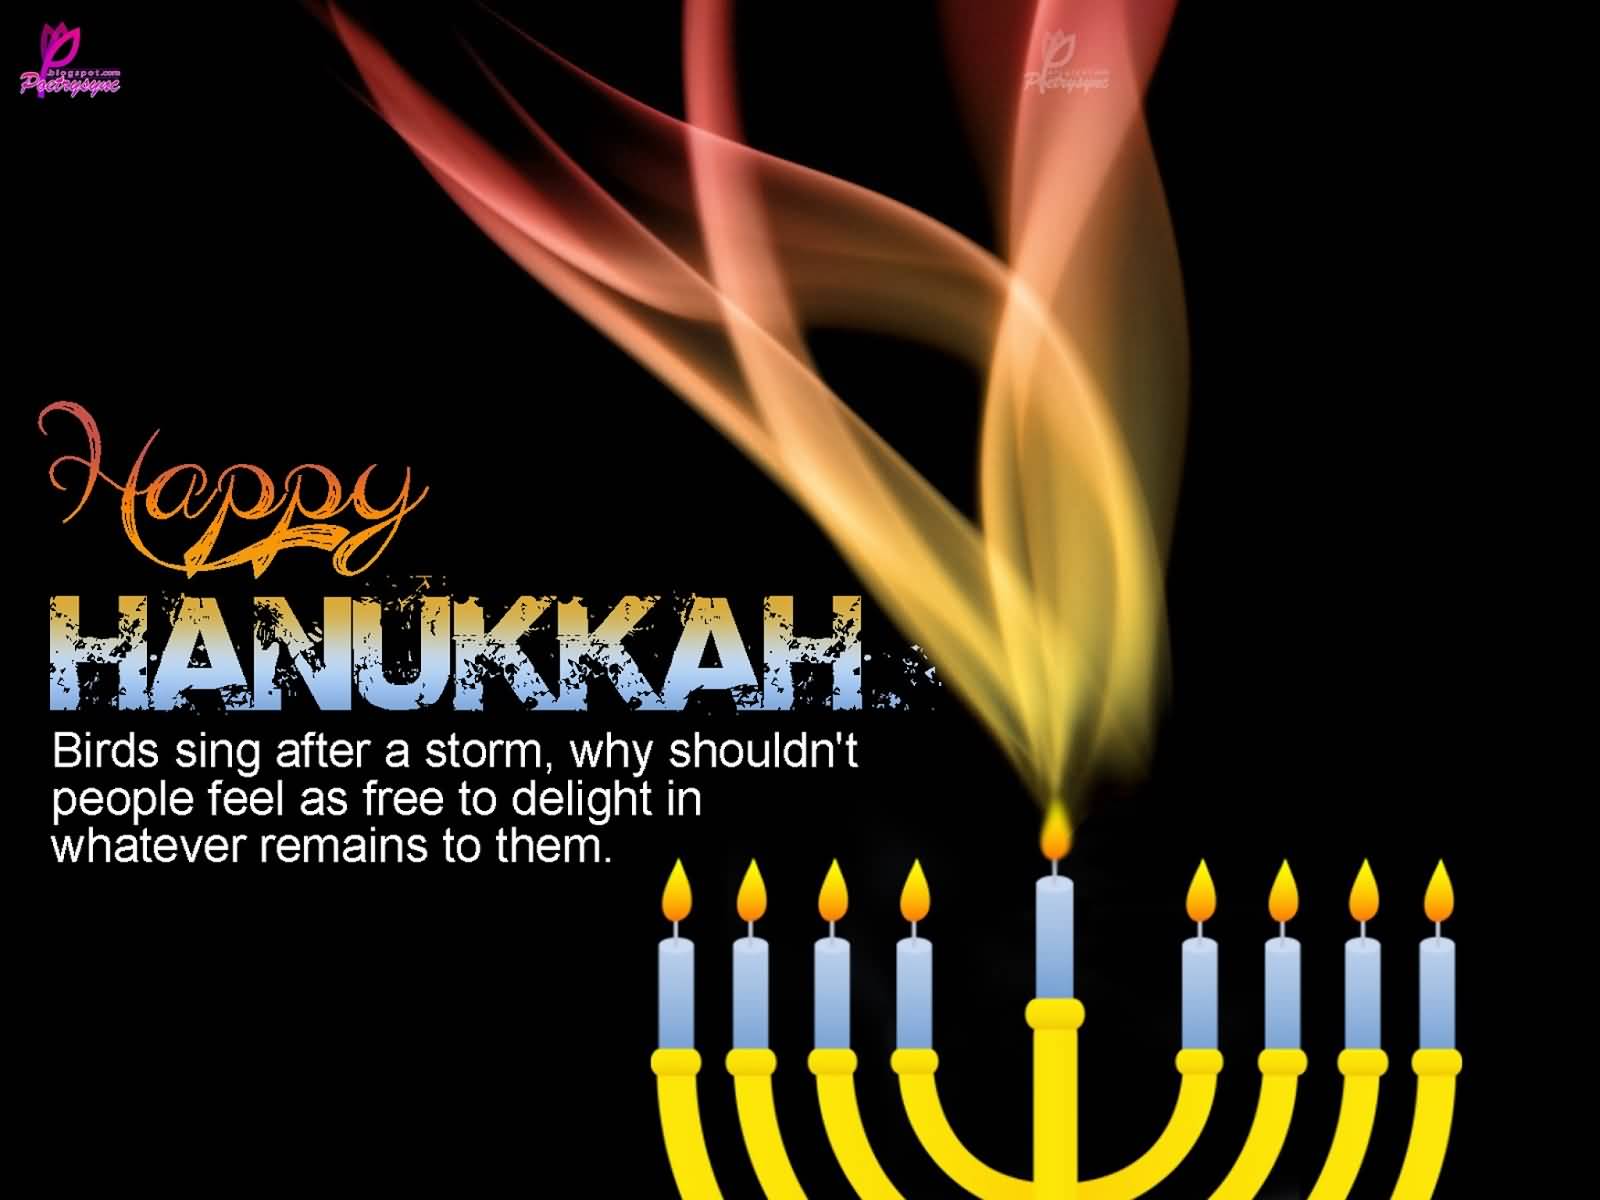 Happy Hanukkah Birds Sing After A Storm, Why Shouldn’t People Feel As Free To Delight In Whatever Remains To Them